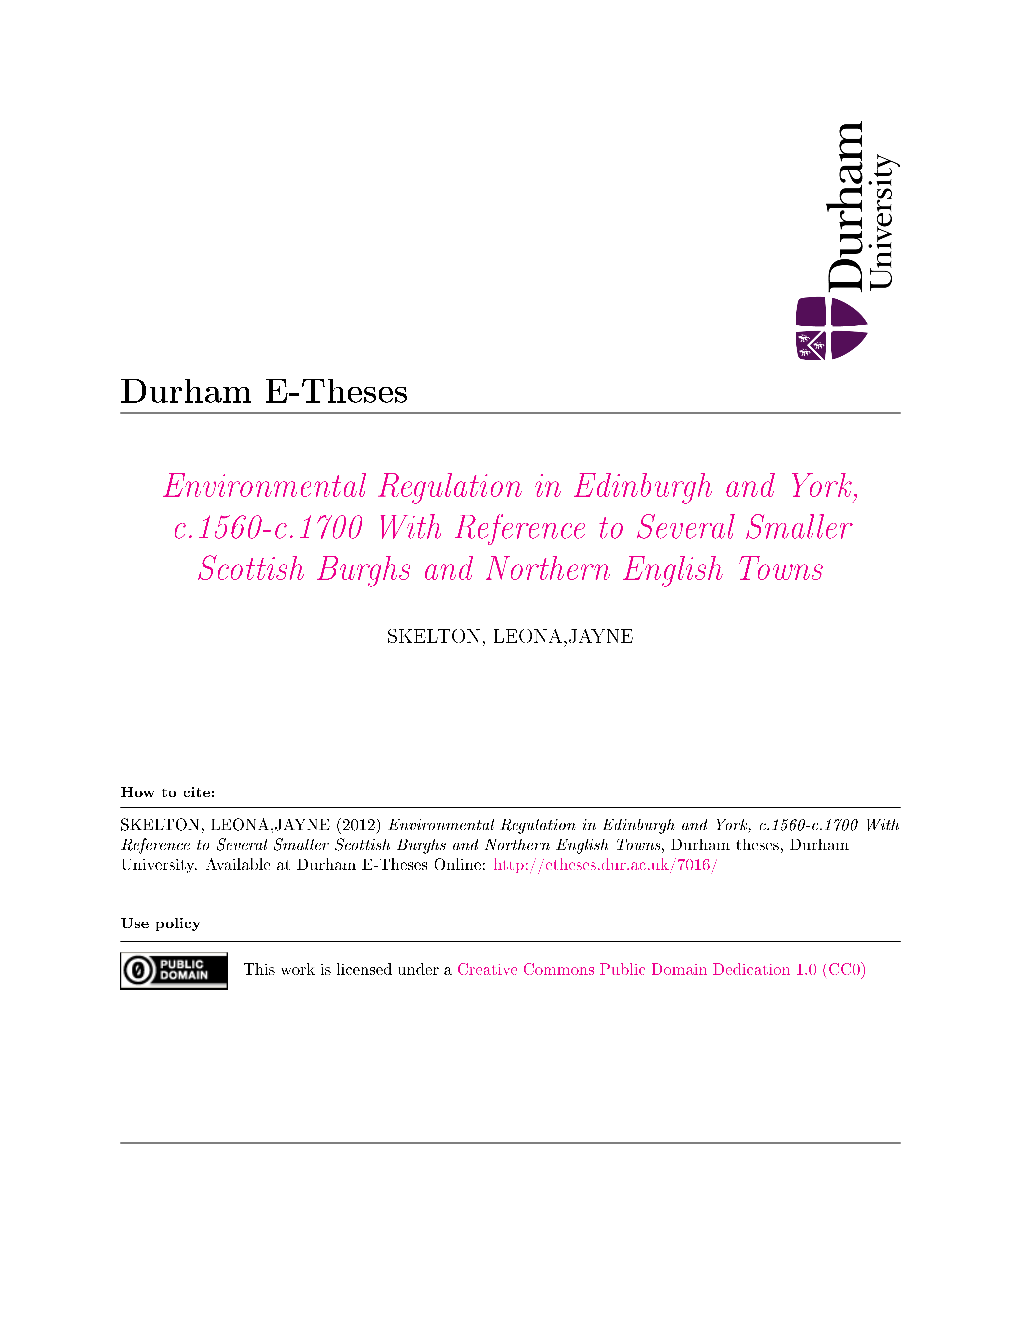 Environmental Regulation in Edinburgh and York, C.1560-C.1700 with Reference to Several Smaller Scottish Burghs and Northern English Towns